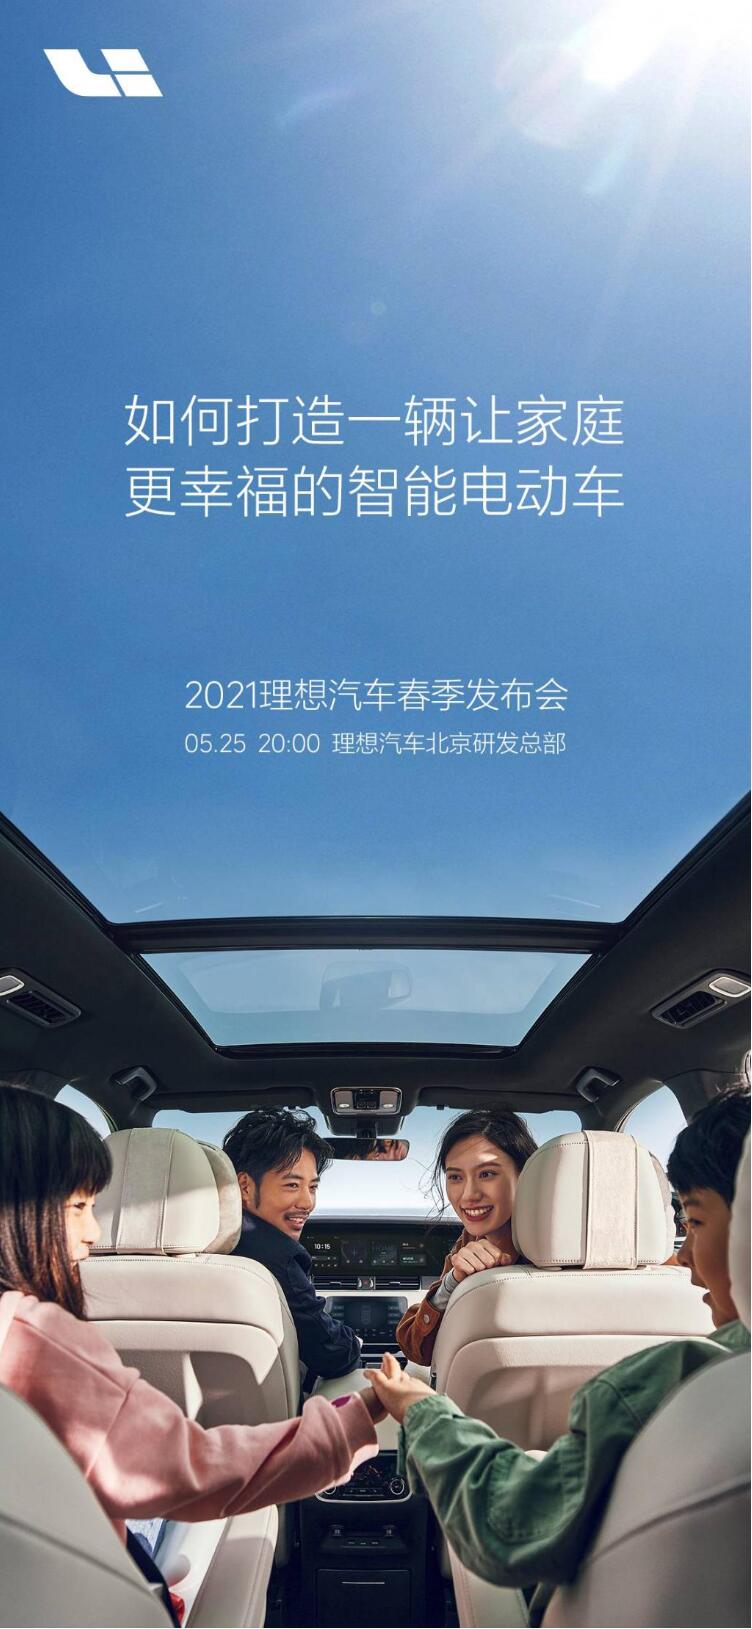 Li Auto to hold launch event on May 25, expected to unveil upgraded Li ONE-CnEVPost